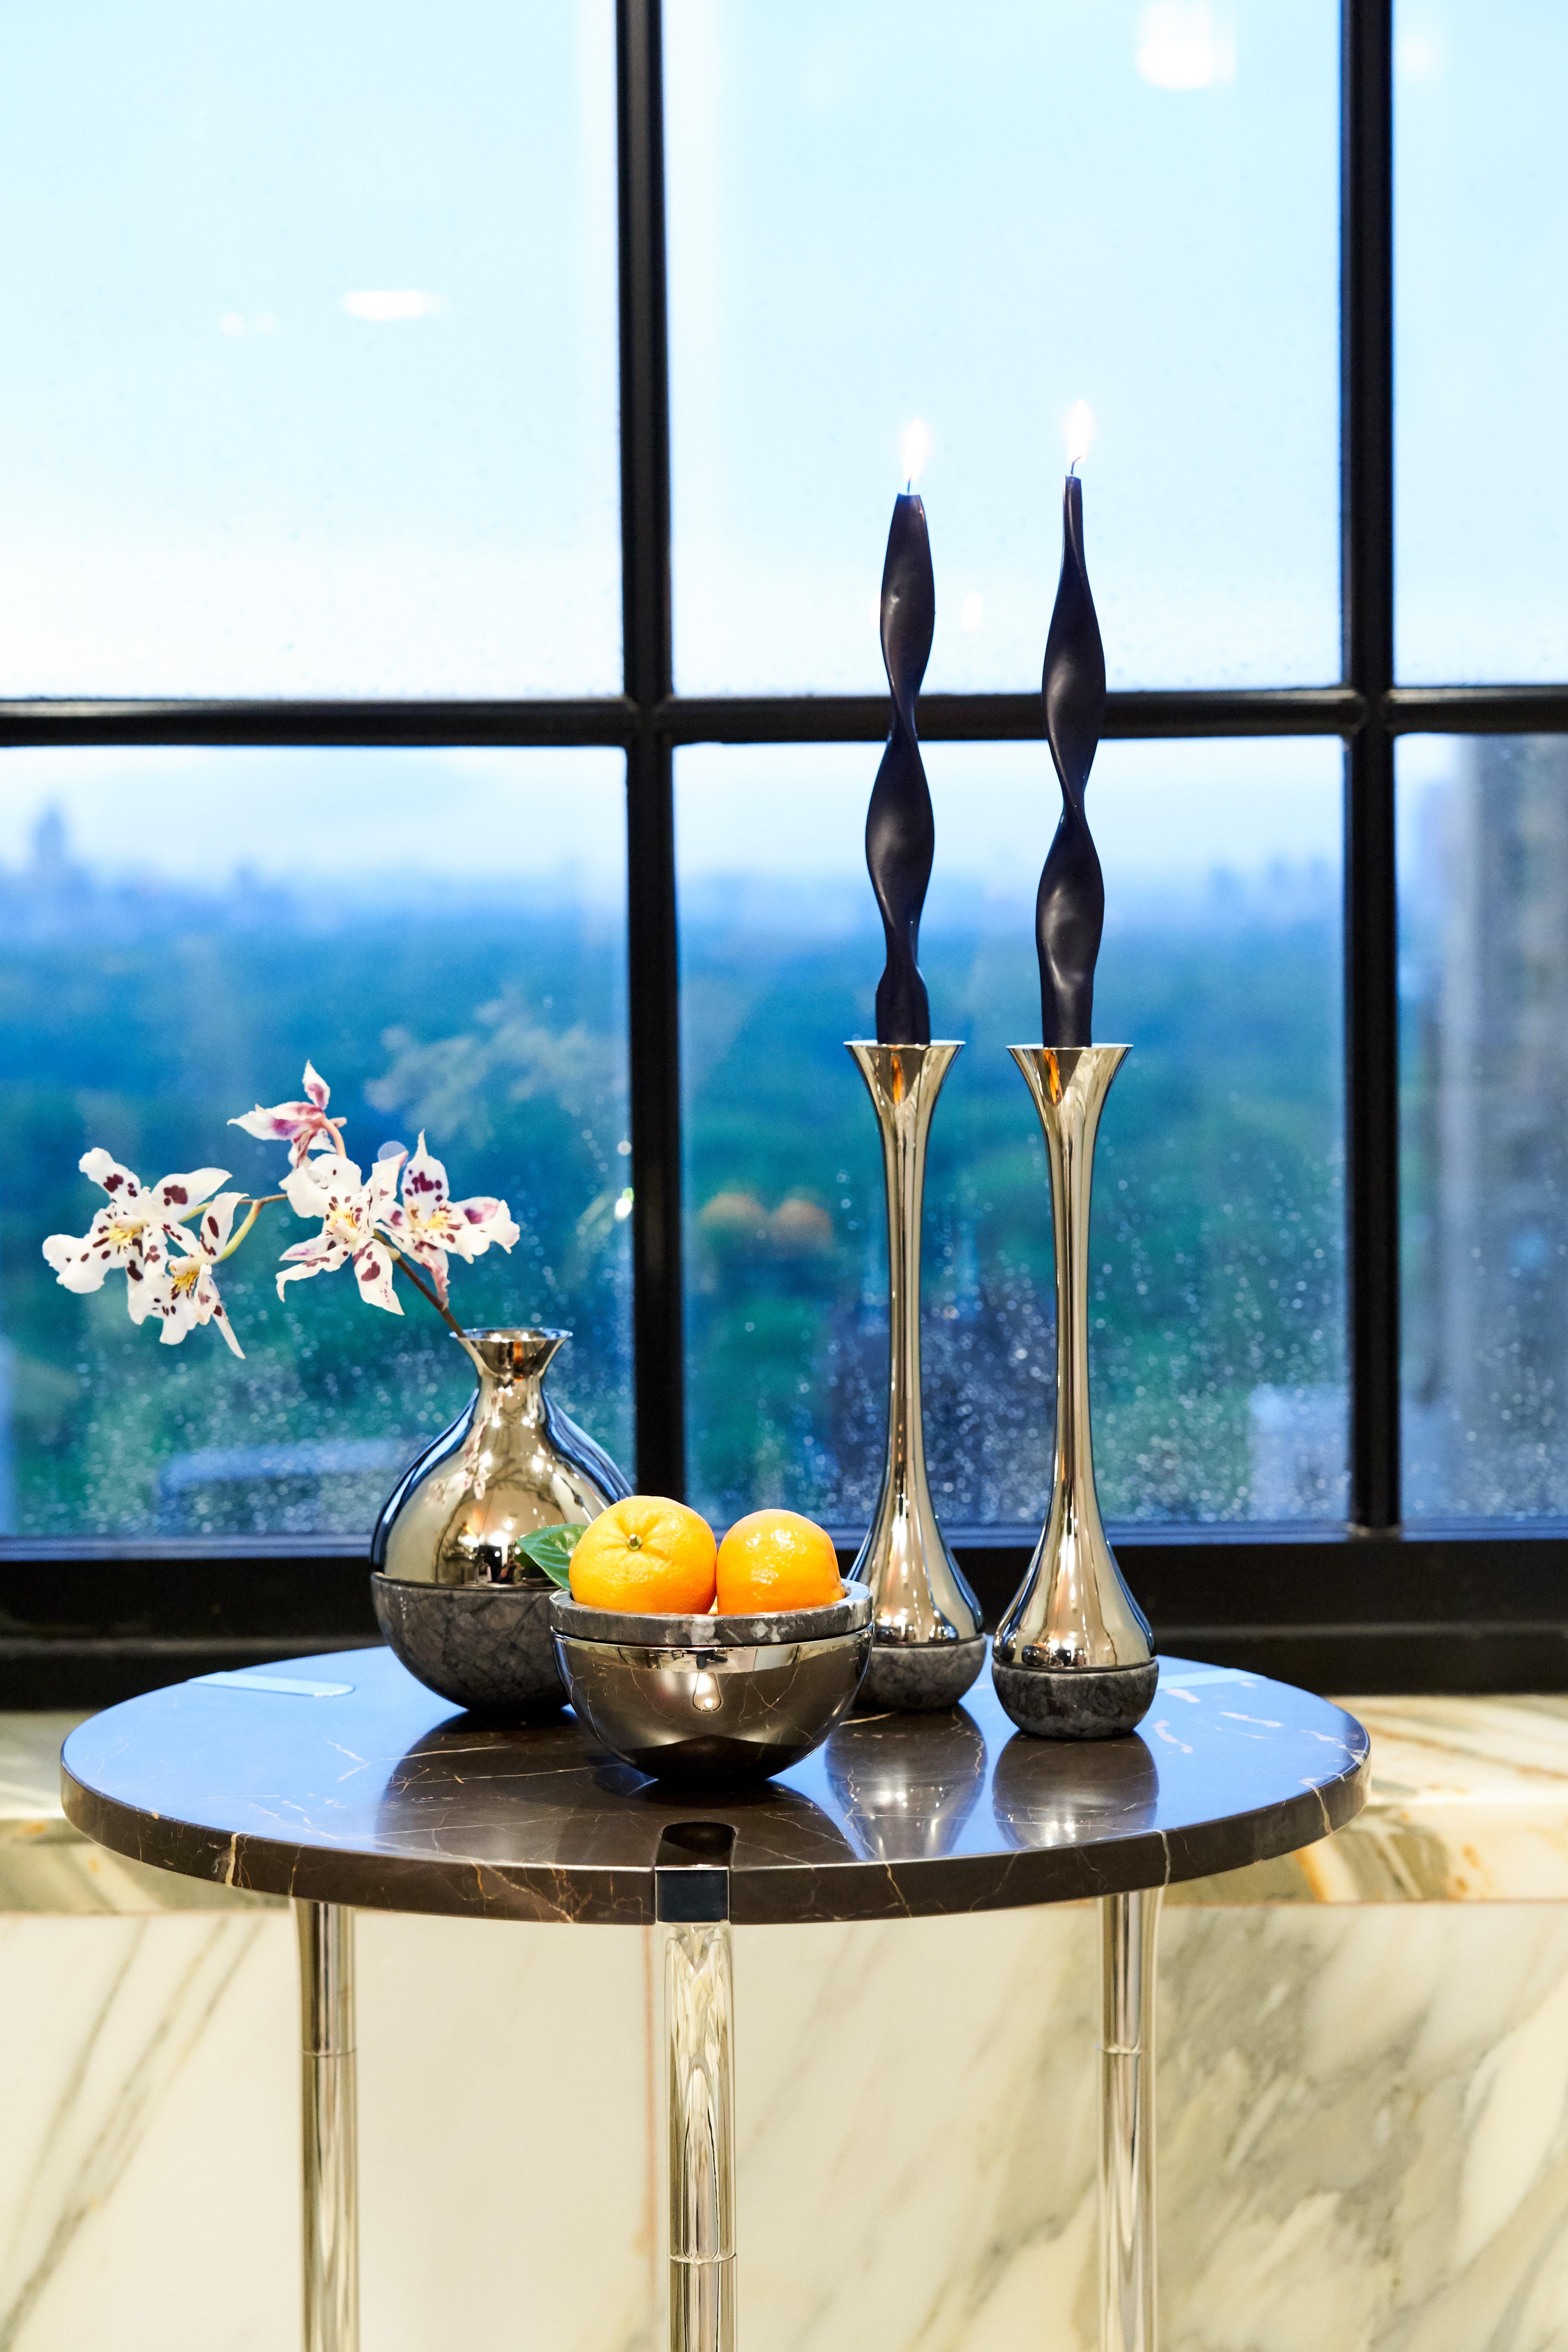 Our Dual collection unites two very different material: honed Italian marble, and polished metal. It is designed to create moments of grace: a bud-vase that holds a single stem of one's favourite flower, candlesticks that adorn the table when